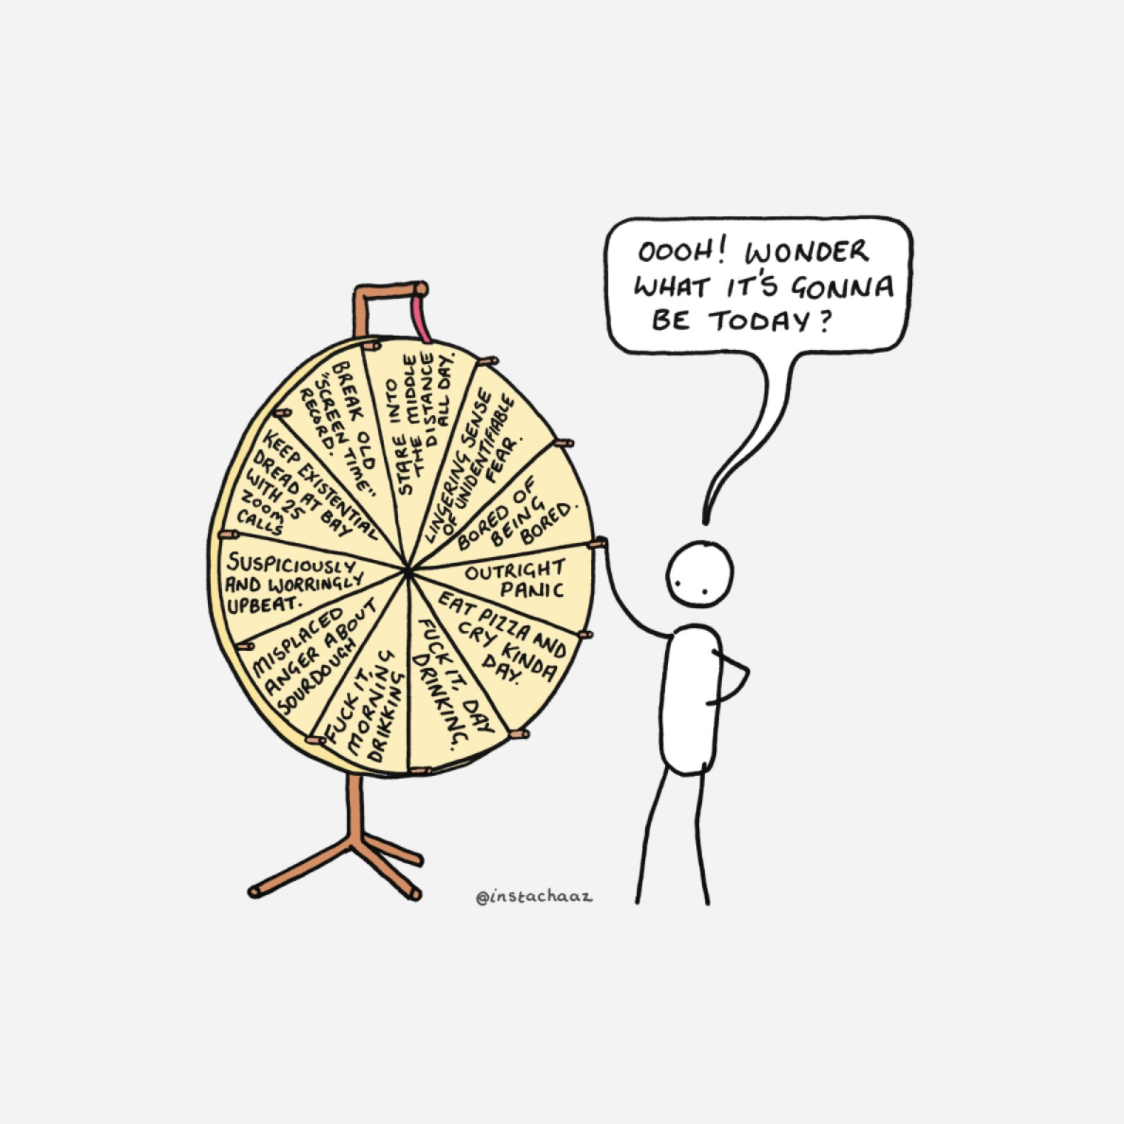 A stick figure standing in front of a Wheel of Fortune style wheel, where each possible option is something regrettable, and the person&#039;s thought bubble says 'Ooh! Wonder what it's going to be today?'